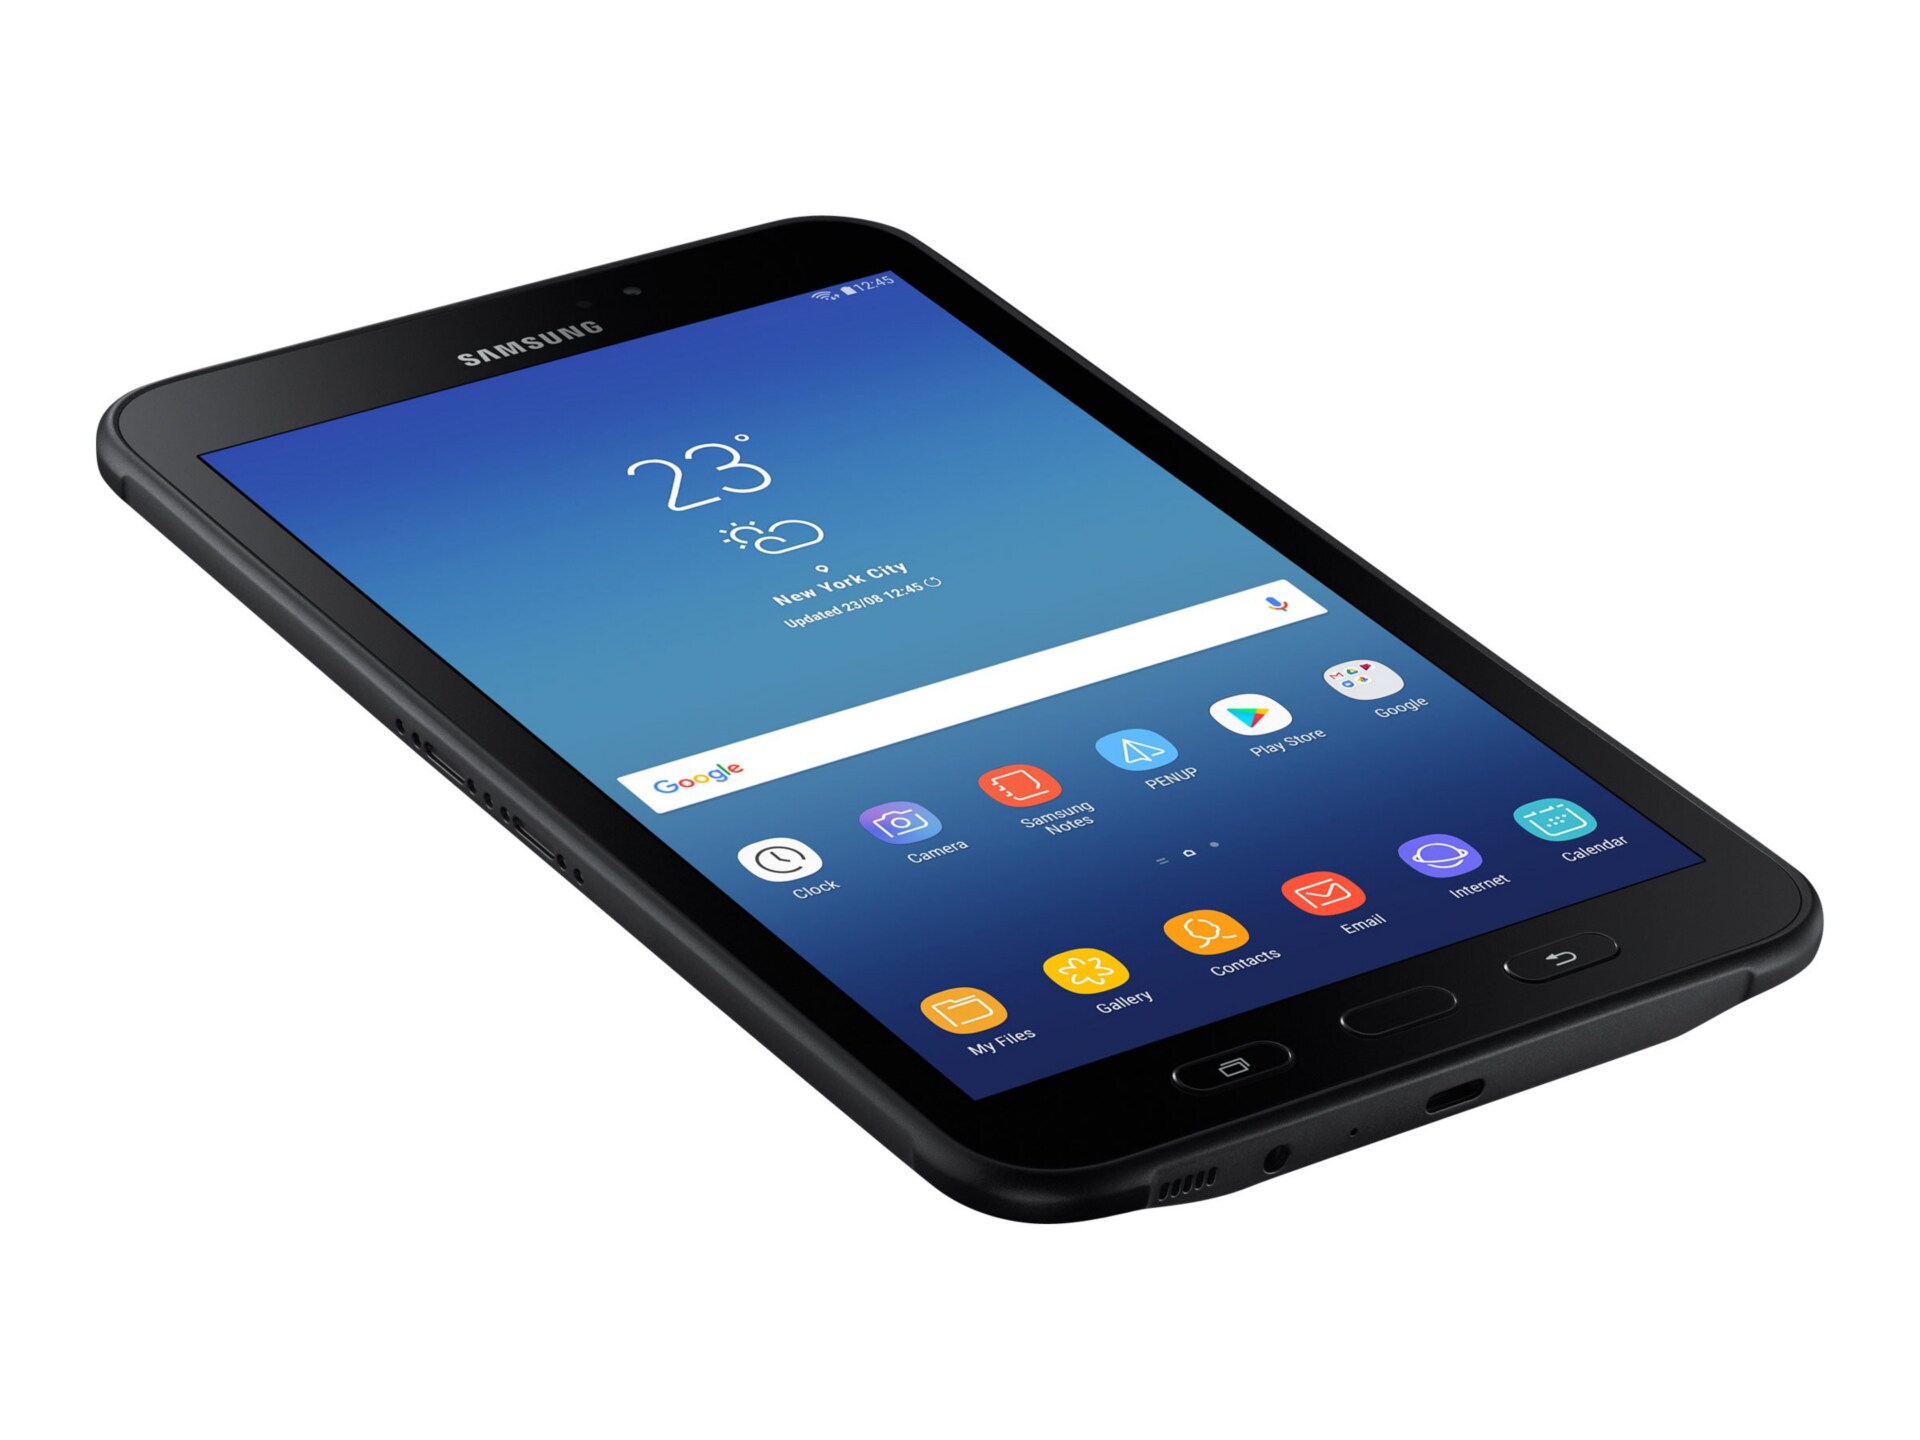 Vulkaan Conjugeren Troosteloos Samsung Galaxy Tab Active2 - tablet - Android 7.1 (Nougat) - 16 GB - 8" - SM-T390NZKAXAR  - -